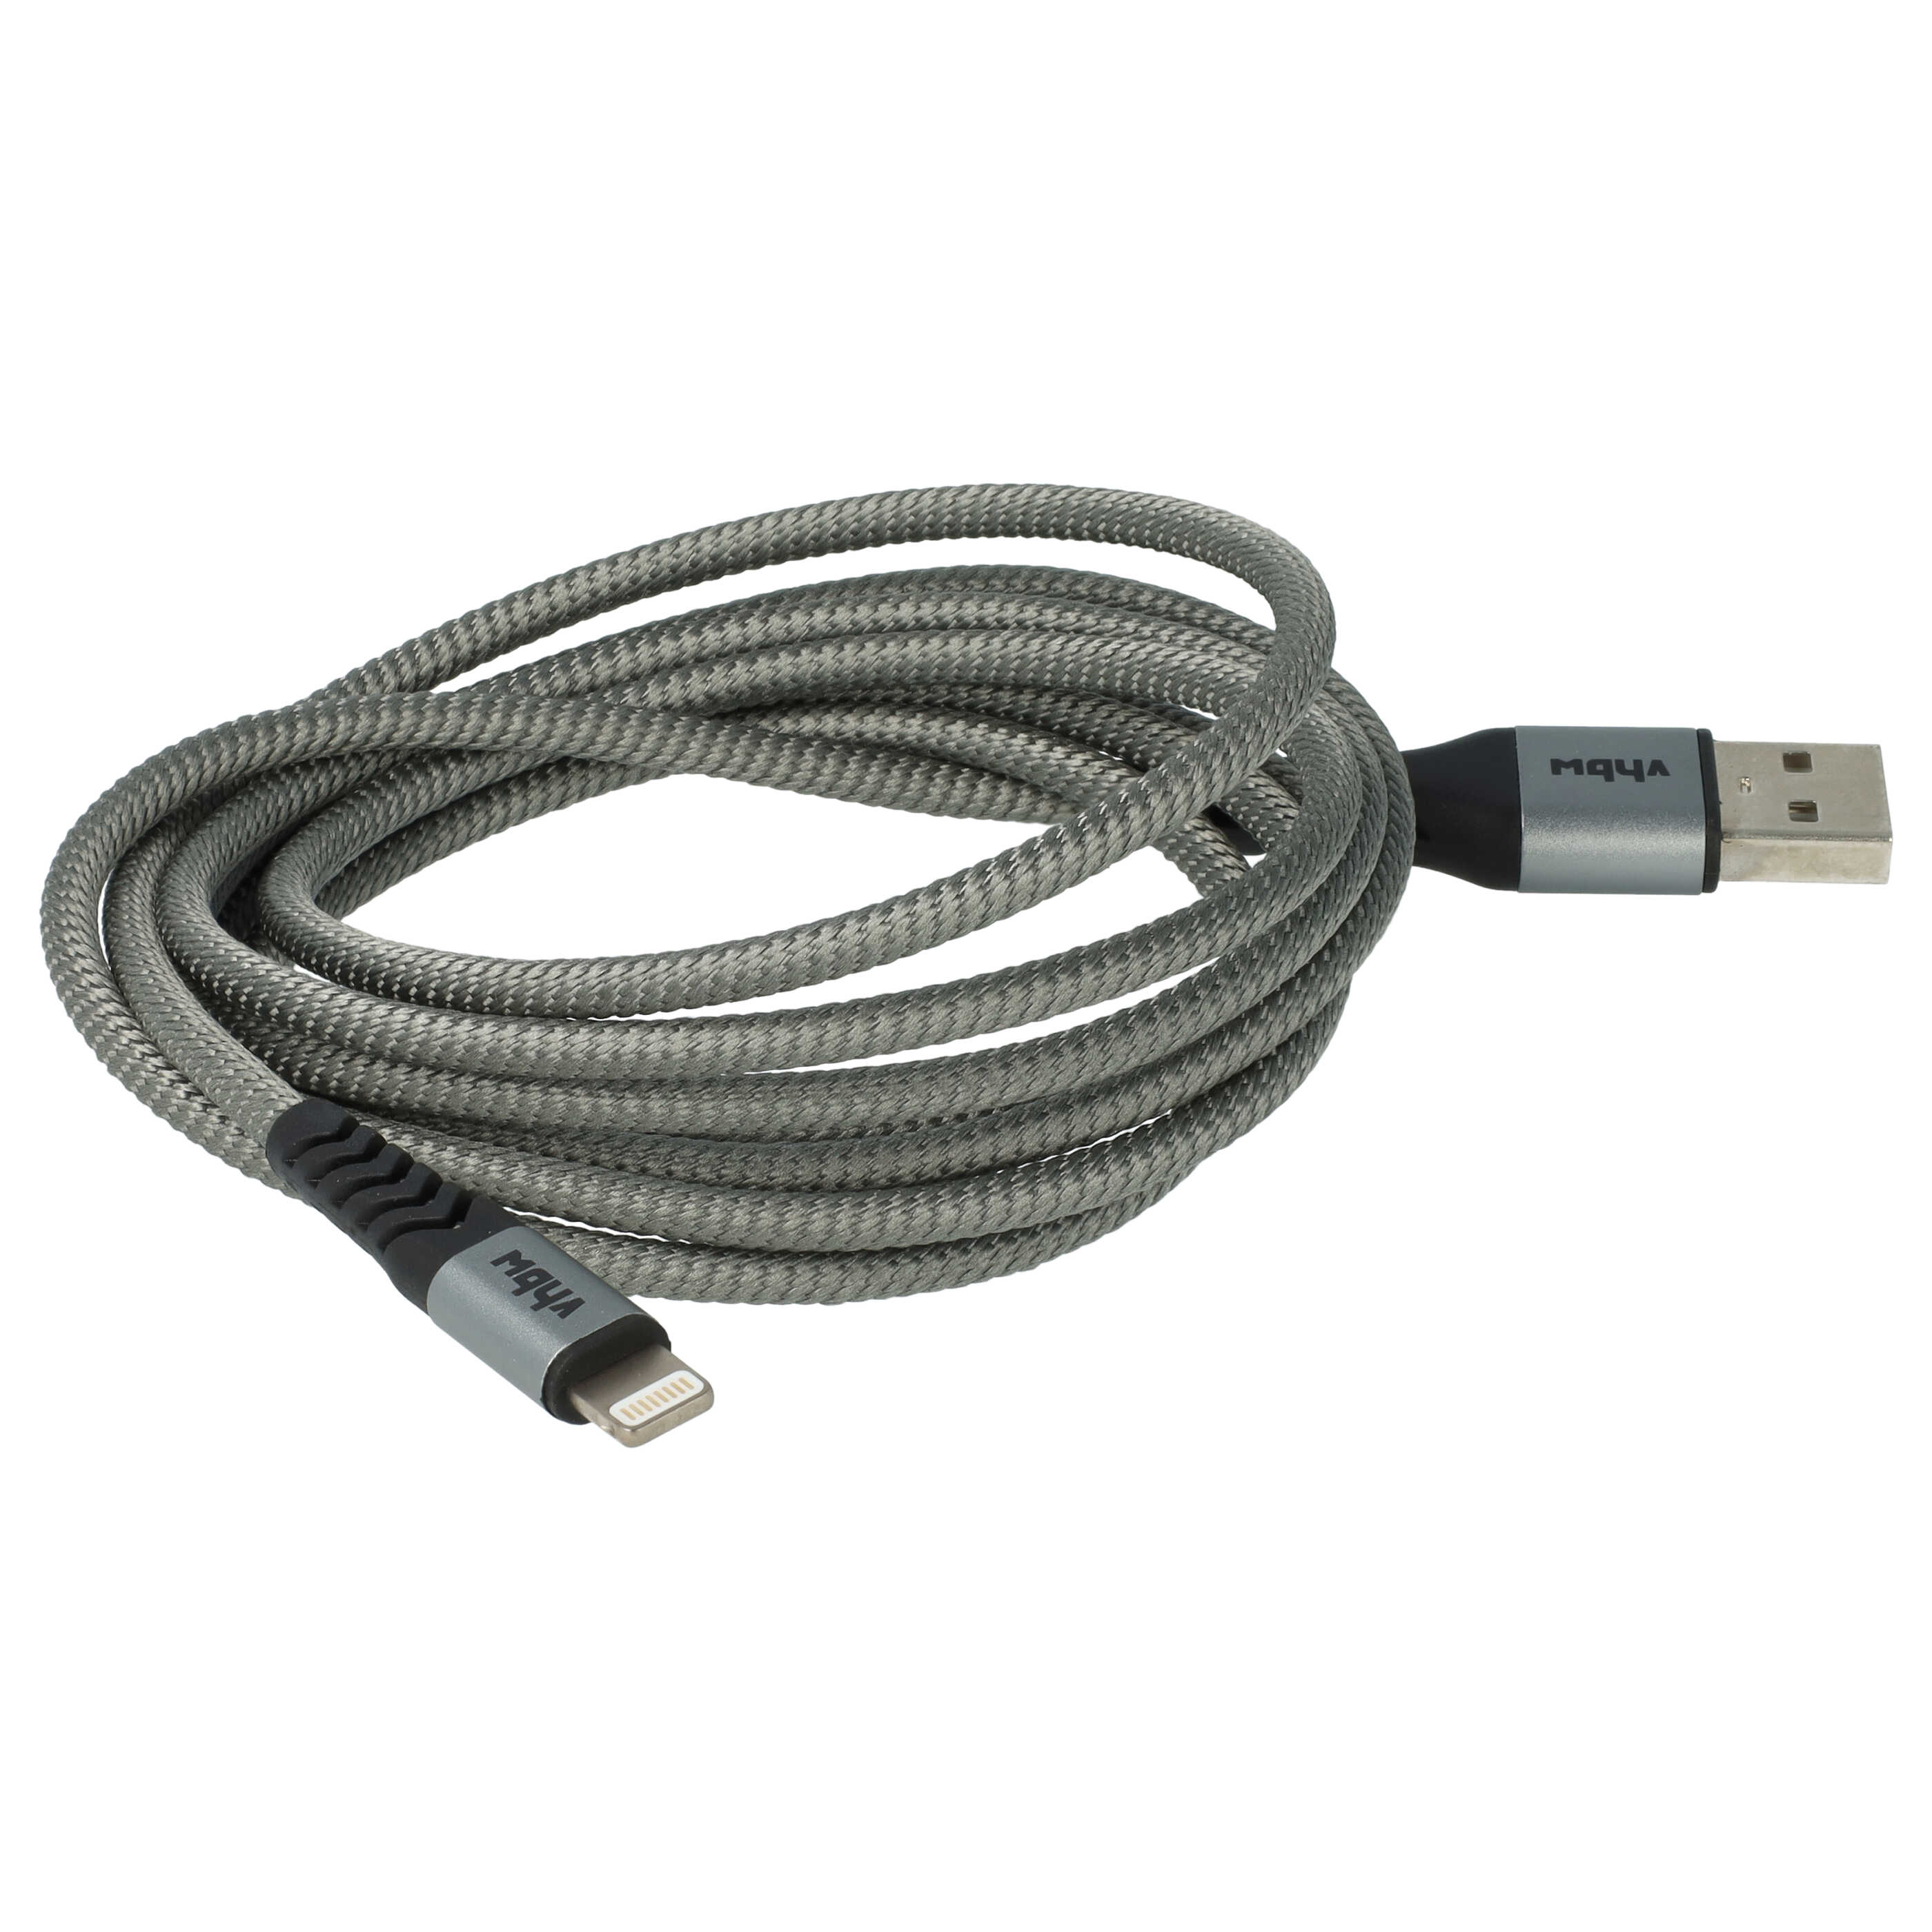 Lightning Cable - USB A suitable for 1.Generation Apple AirPods Apple iOS - Black Grey, 180cm